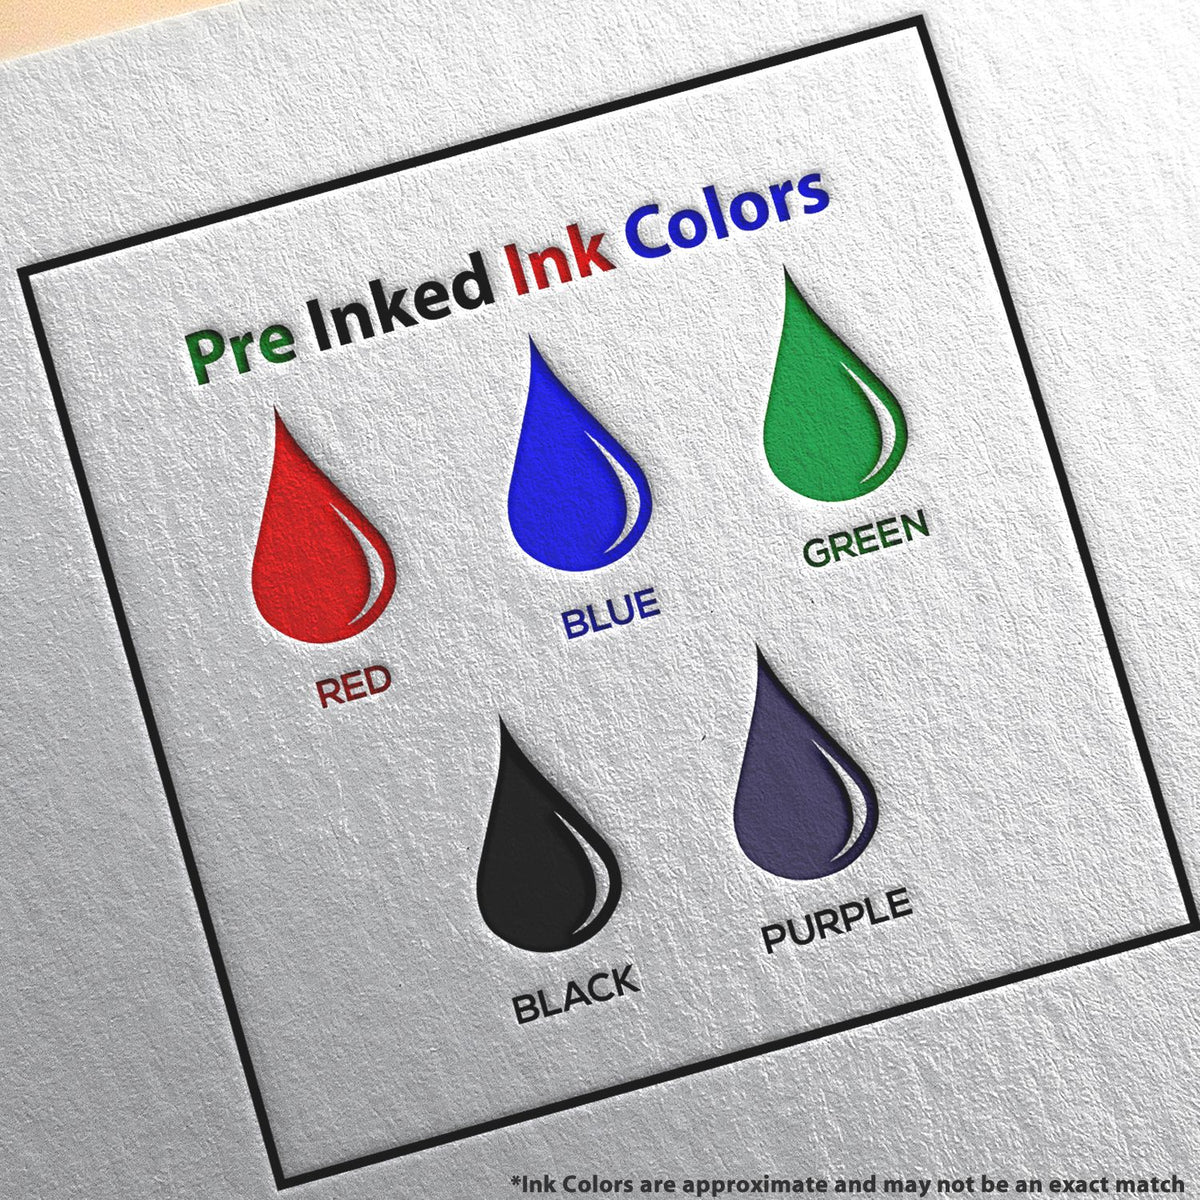 A picture showing the different ink colors or hues available for the Slim Pre-Inked Maryland Landscape Architect Seal Stamp product.